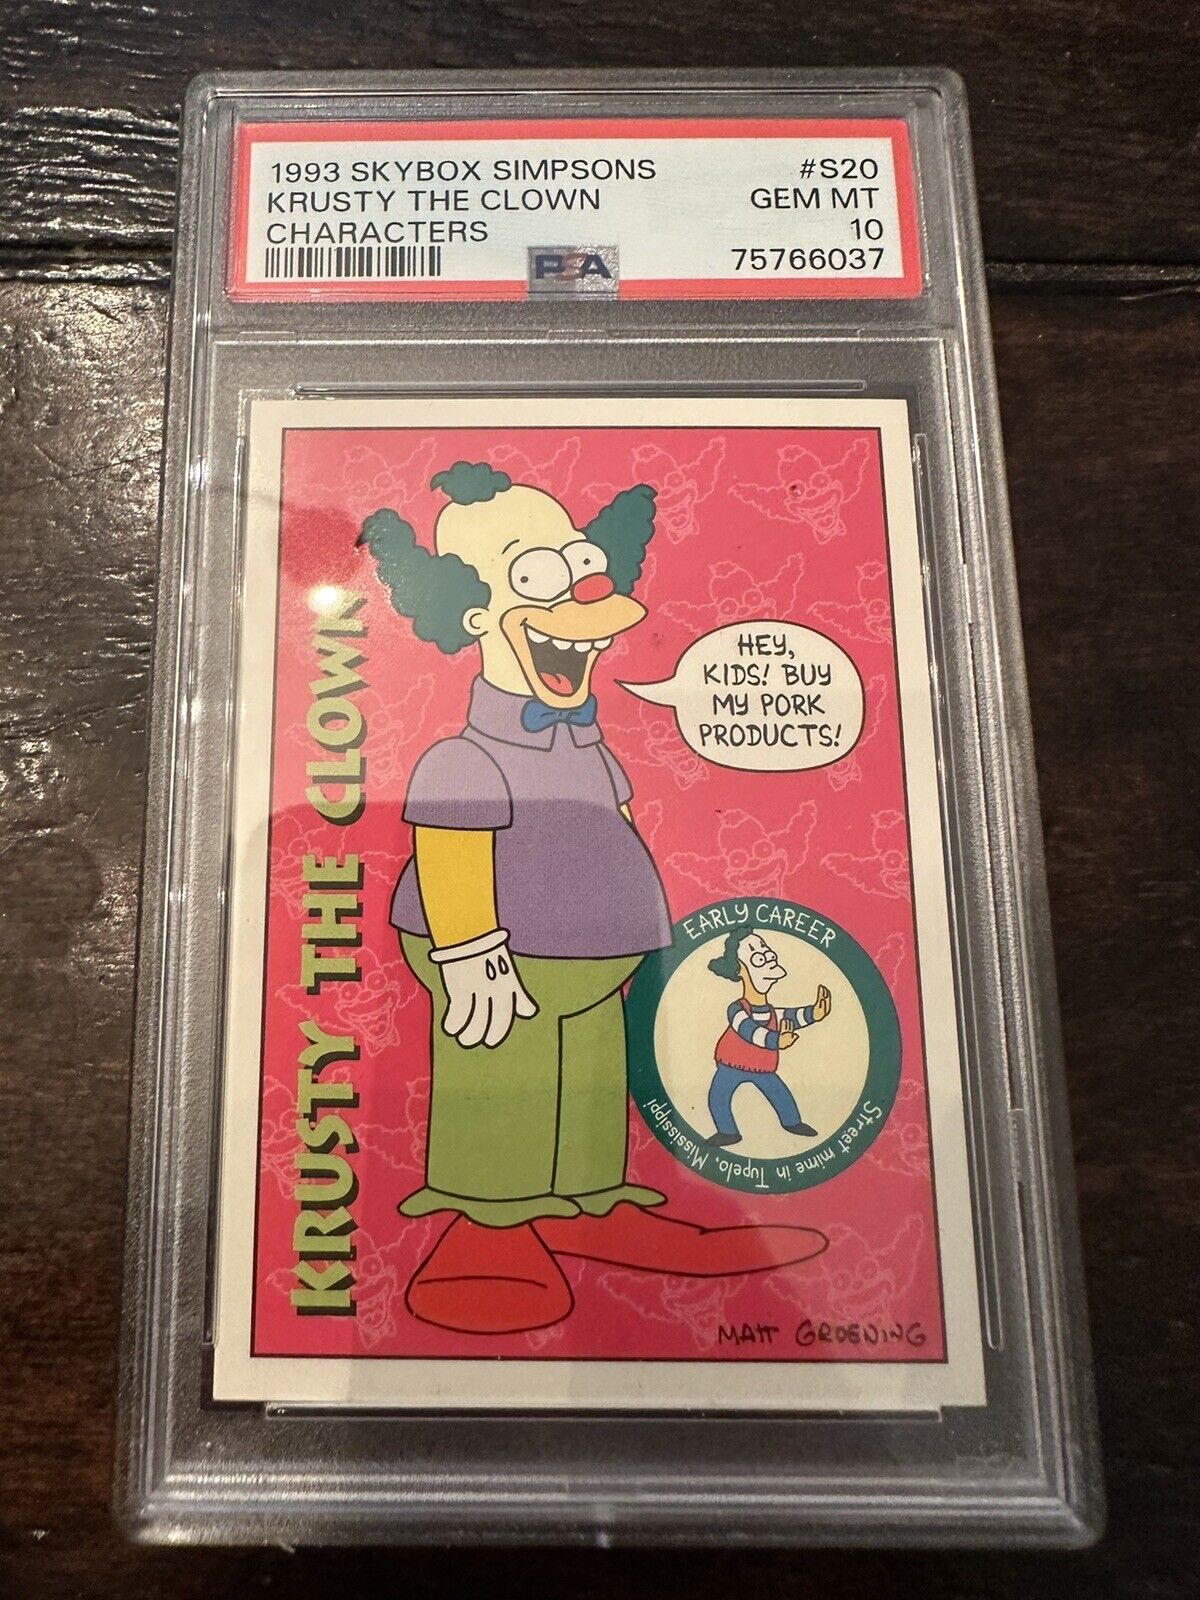 The Simpsons - 1993 Skybox Trading Cards #S20 KRUSTY THE CLOWN PSA 10